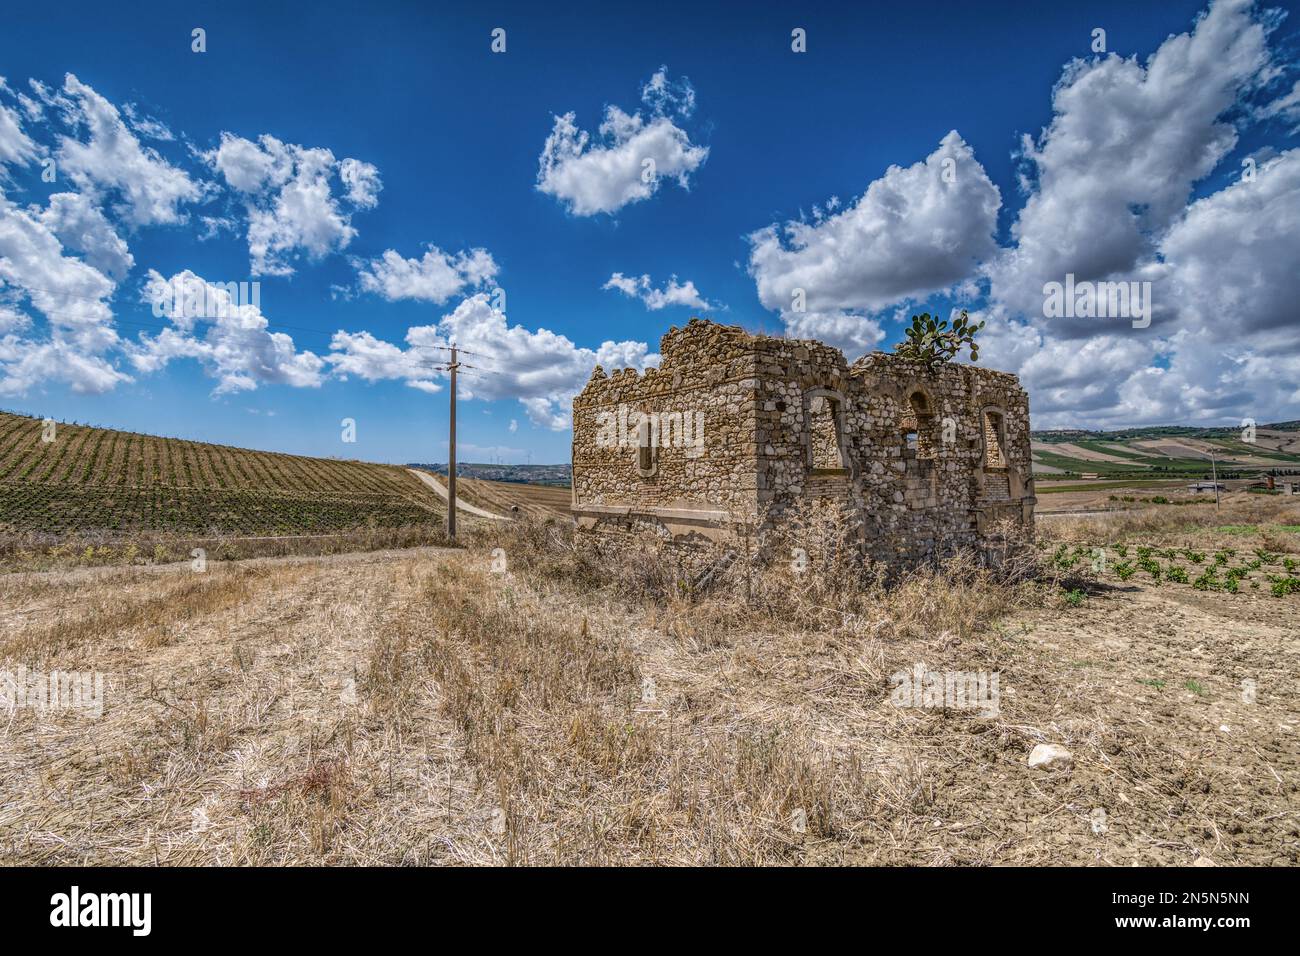 Abandoned country house in the Sicilian hinterland, Italy Stock Photo